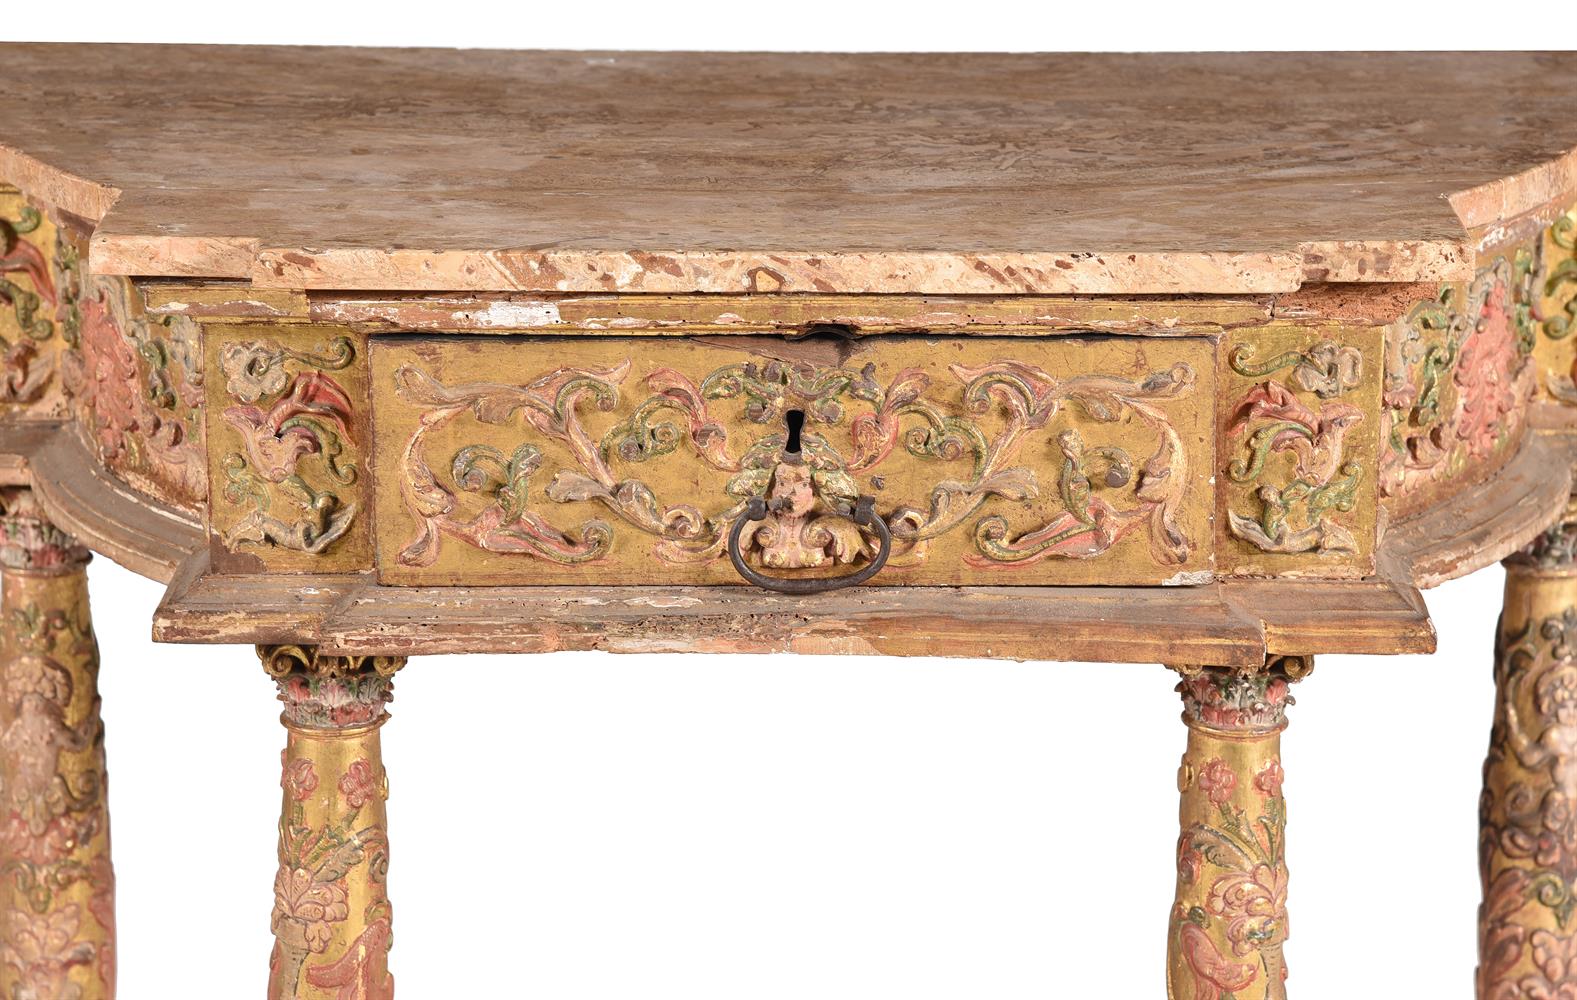 A SPANISH GILTWOOD AND POLYCHROME PAINTED SIDE OR ALTAR TABLE, LATE 17TH/EARLY 18TH CENTURY - Image 2 of 7